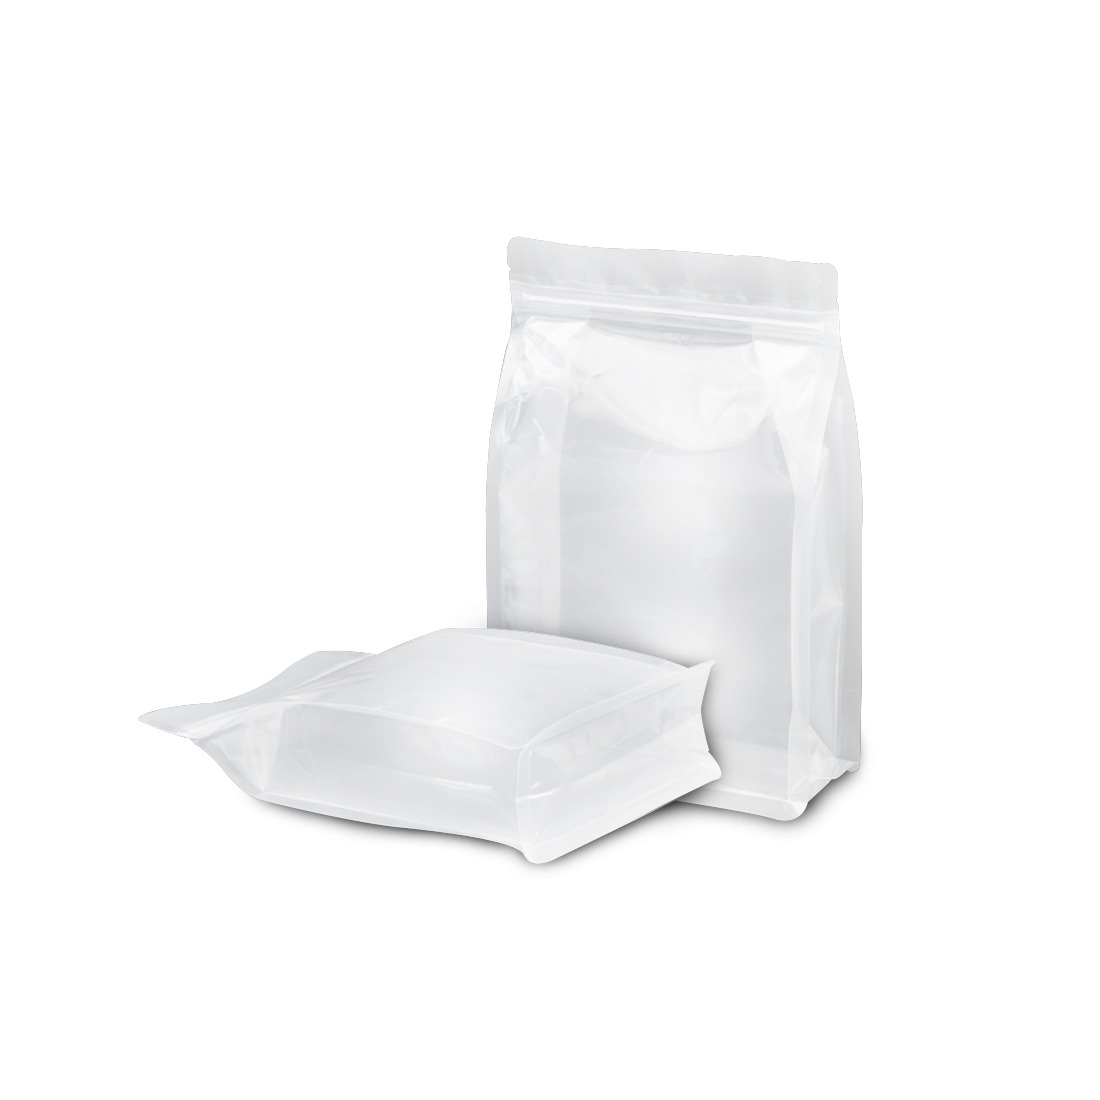 6.5" Inch X 10.5" Inch Transparent Flat Bottom Pouch with Zipper